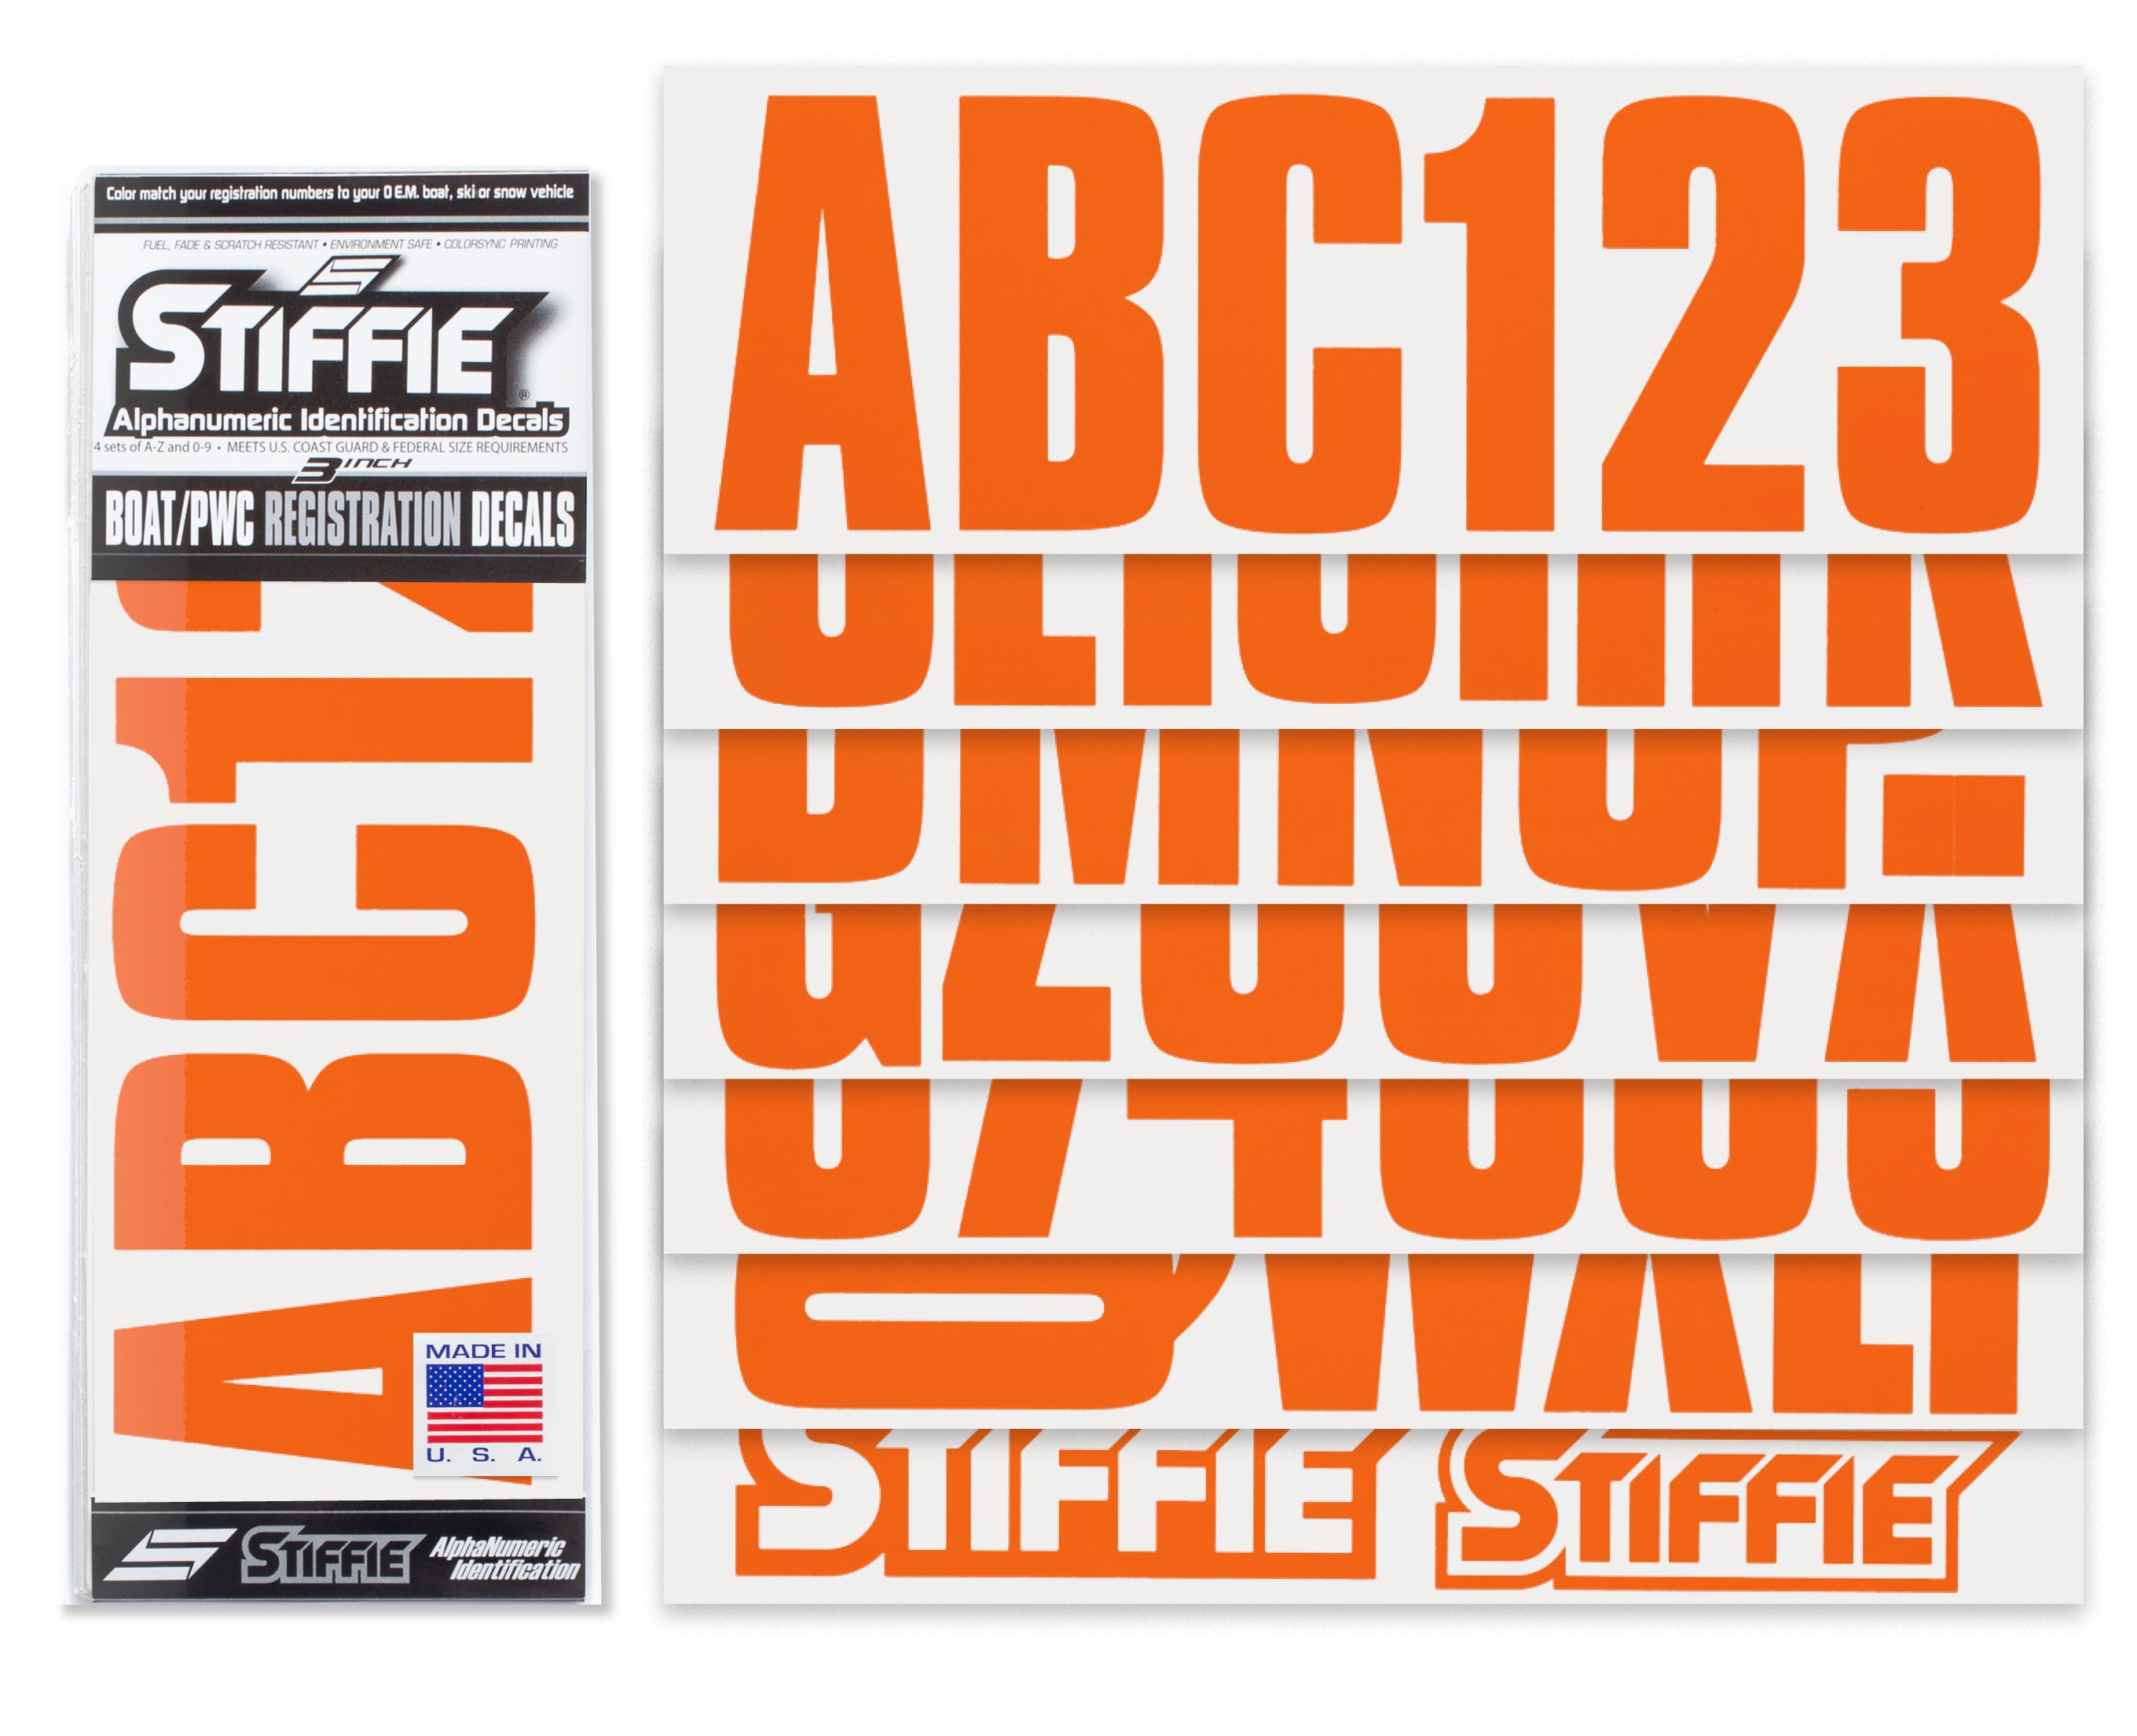 STIFFIE Uniline Orange 3" ID Kit Alpha-Numeric Registration Identification Numbers Stickers Decals for Boats & Personal Watercraft